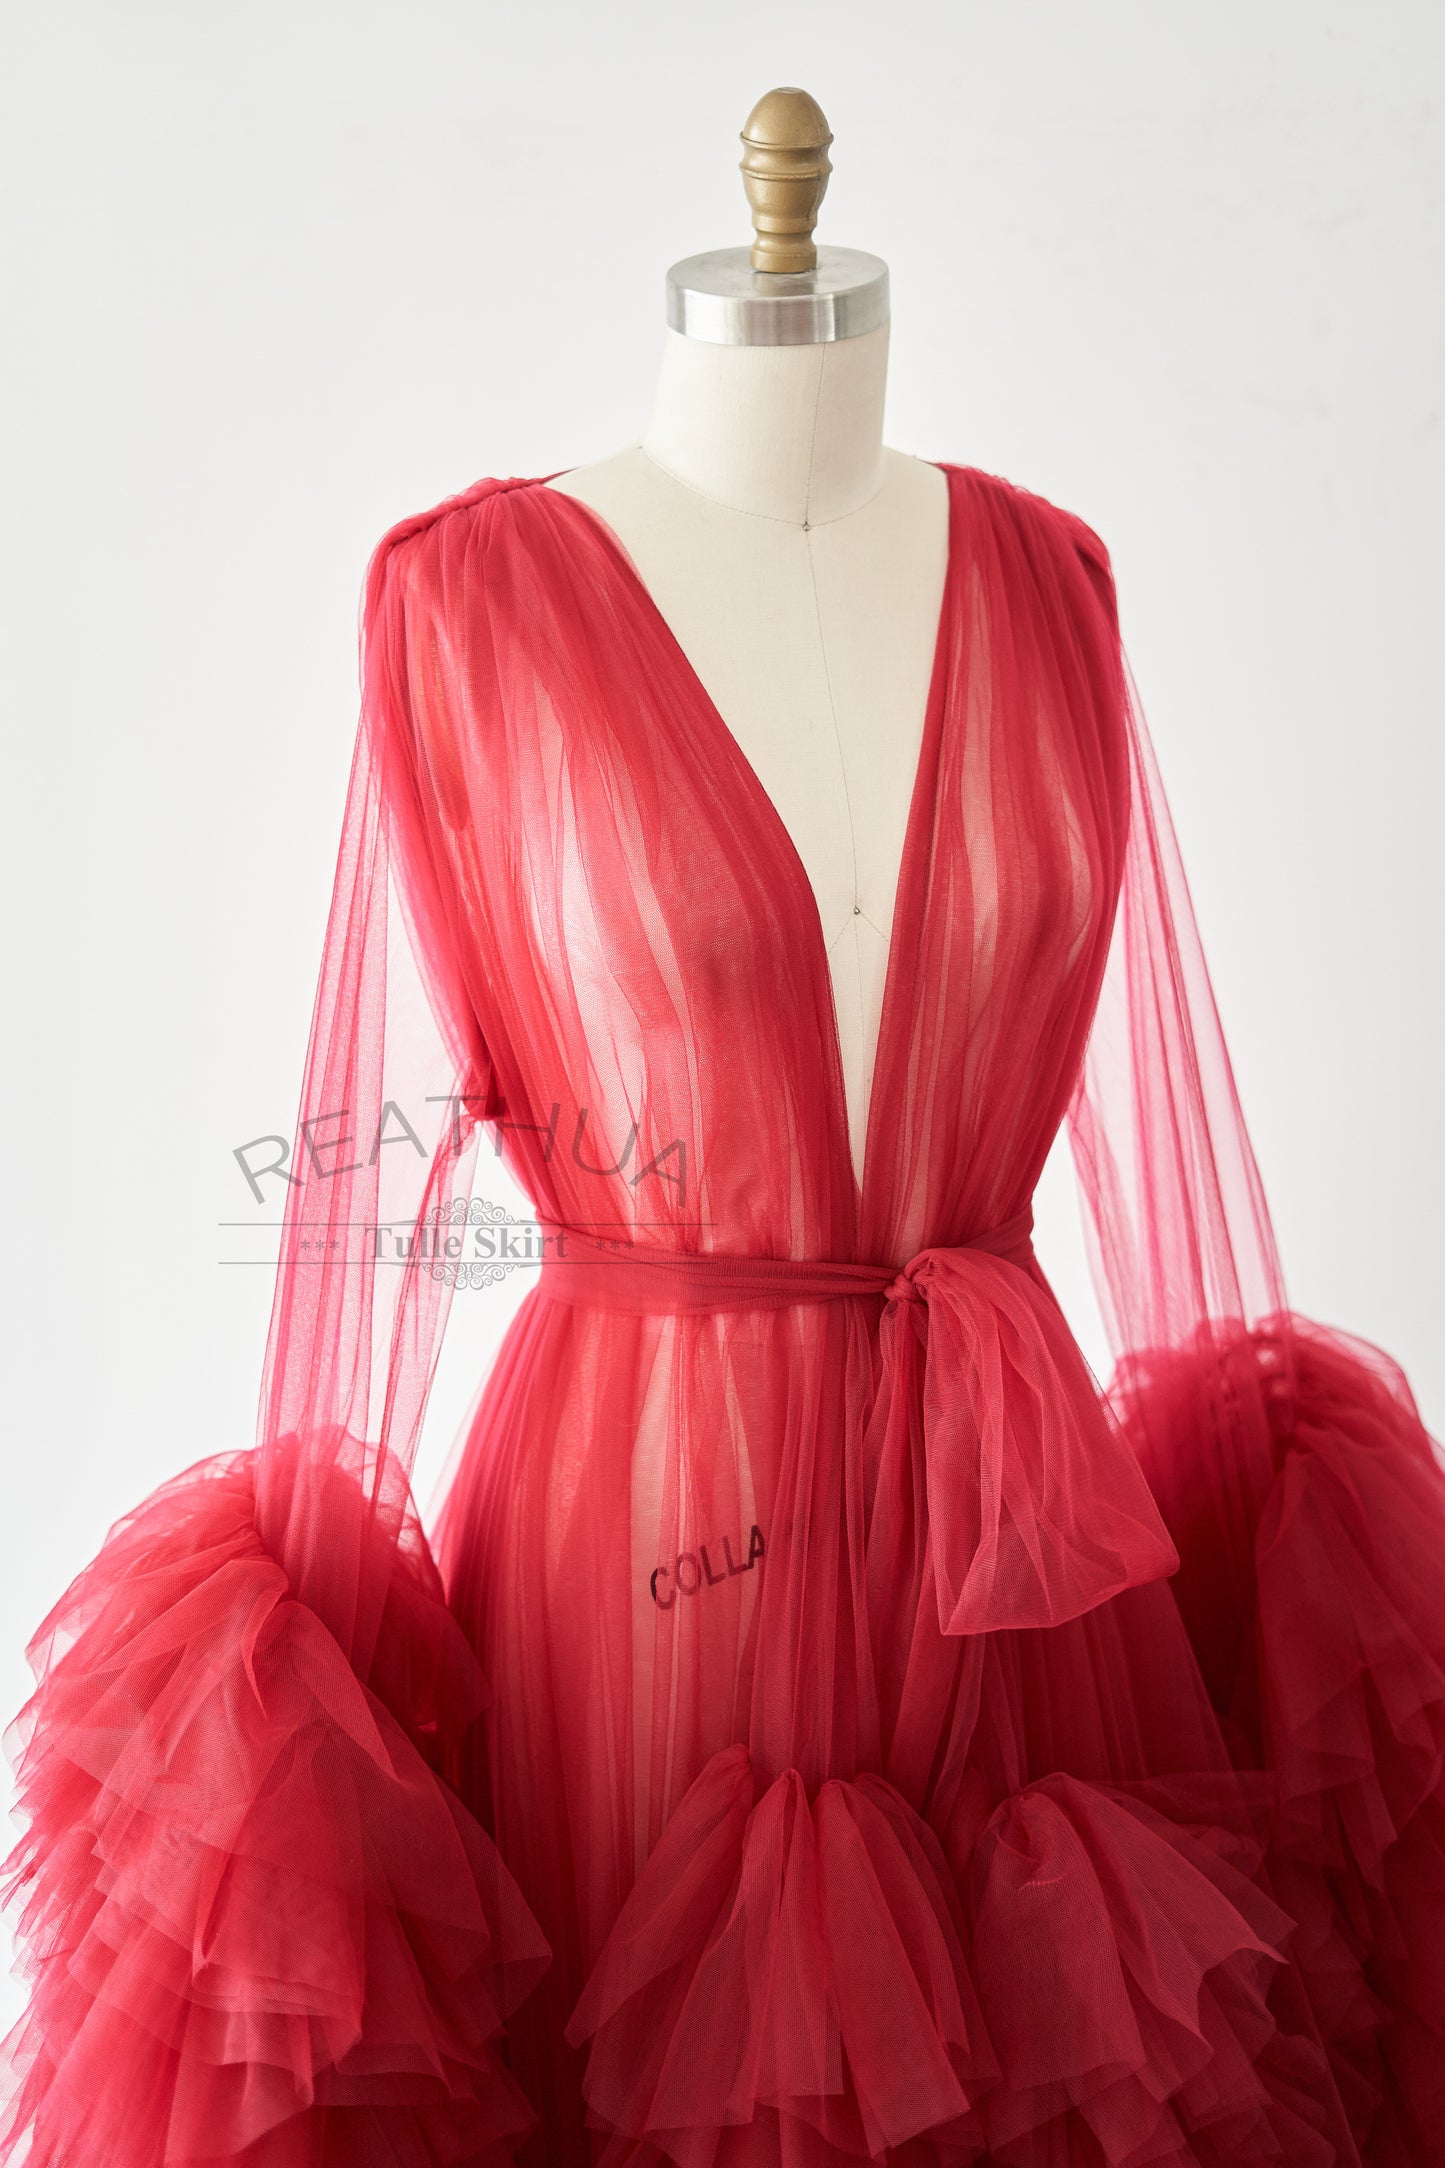 Dark Red Tulle Maternity Gown Tulle Dress for Maternity Photography Photo Shoot